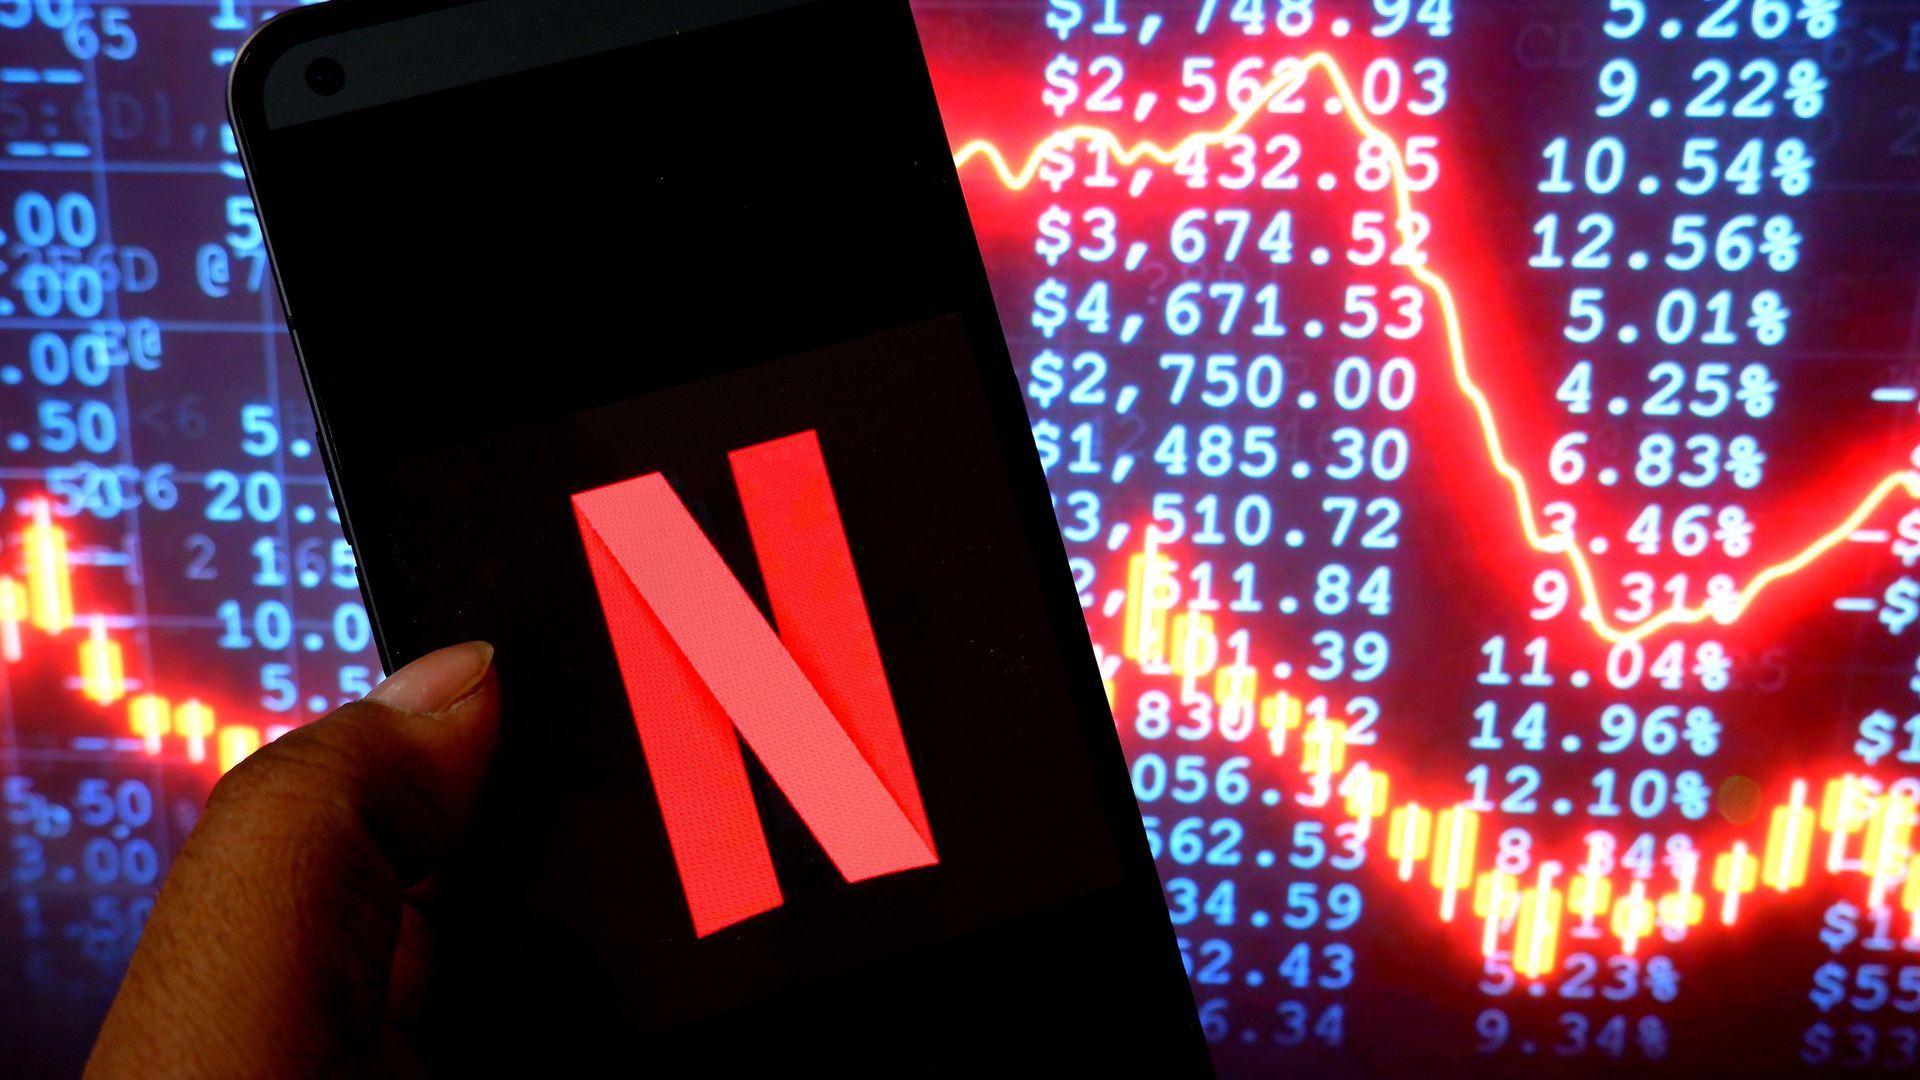 A photo illustration of the Netflix logo on a smartphone in front of a stock table and chart